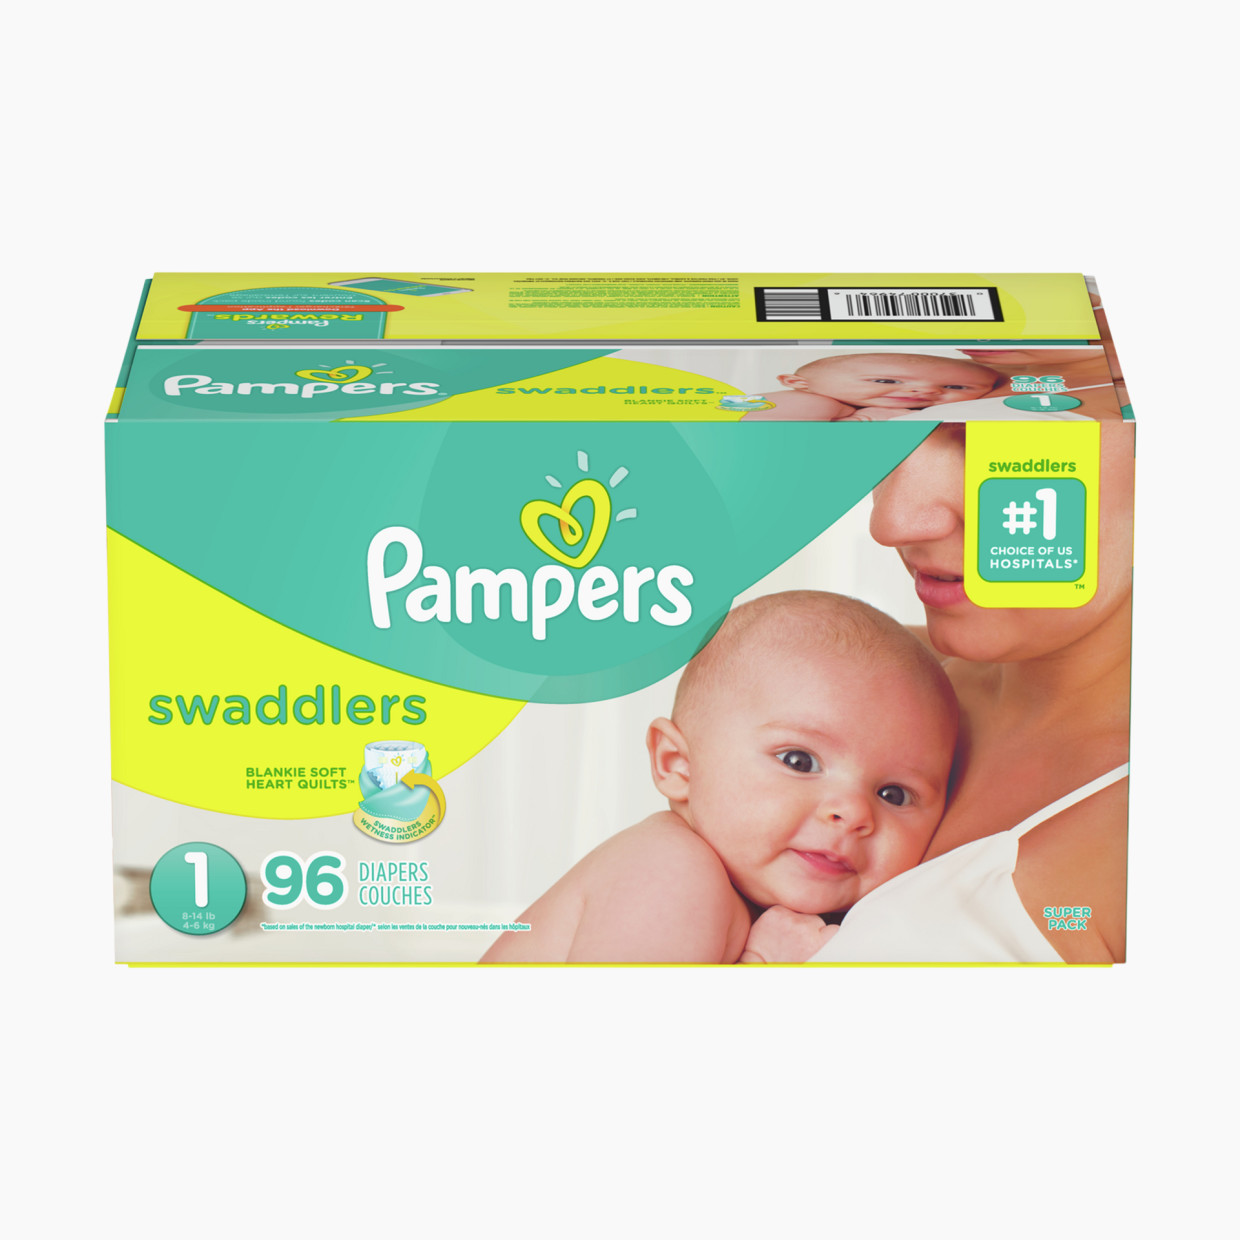 Pampers Swaddlers Disposable Diapers - Size 1, 96 Count.